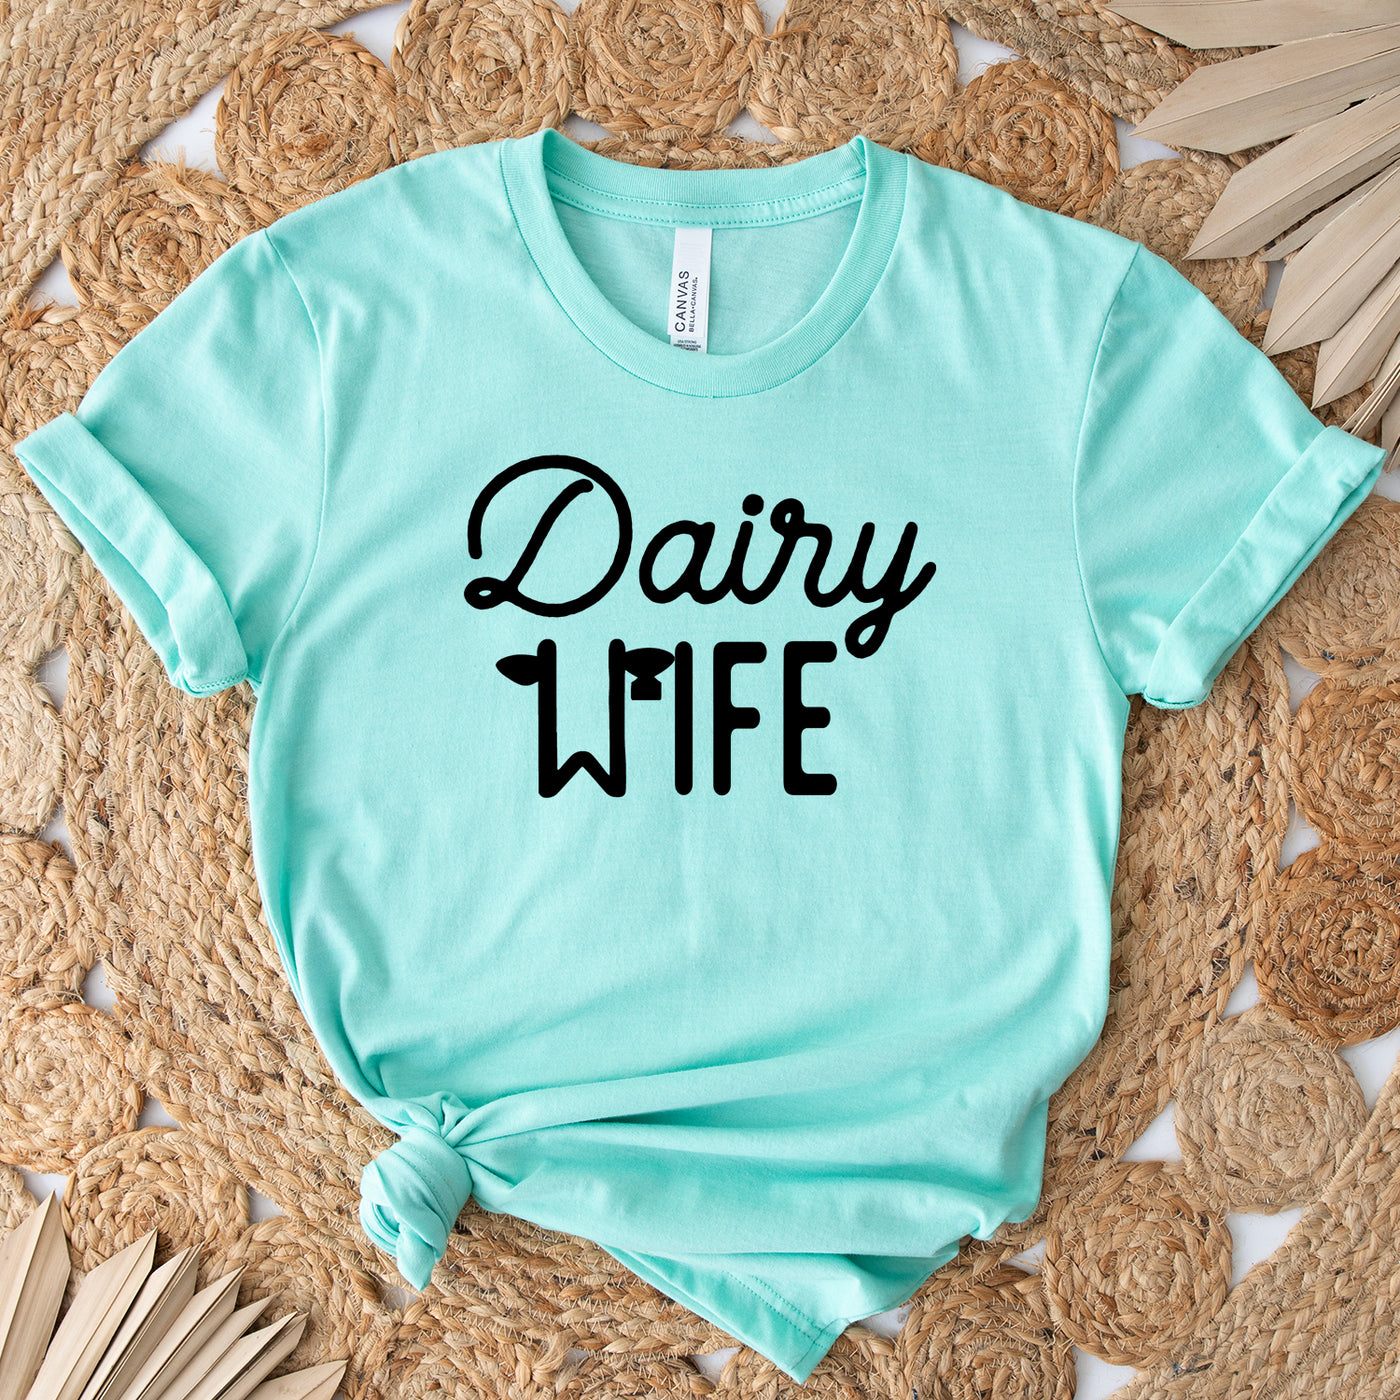 Dairy Wife T-Shirt (XS-4XL) - Multiple Colors!